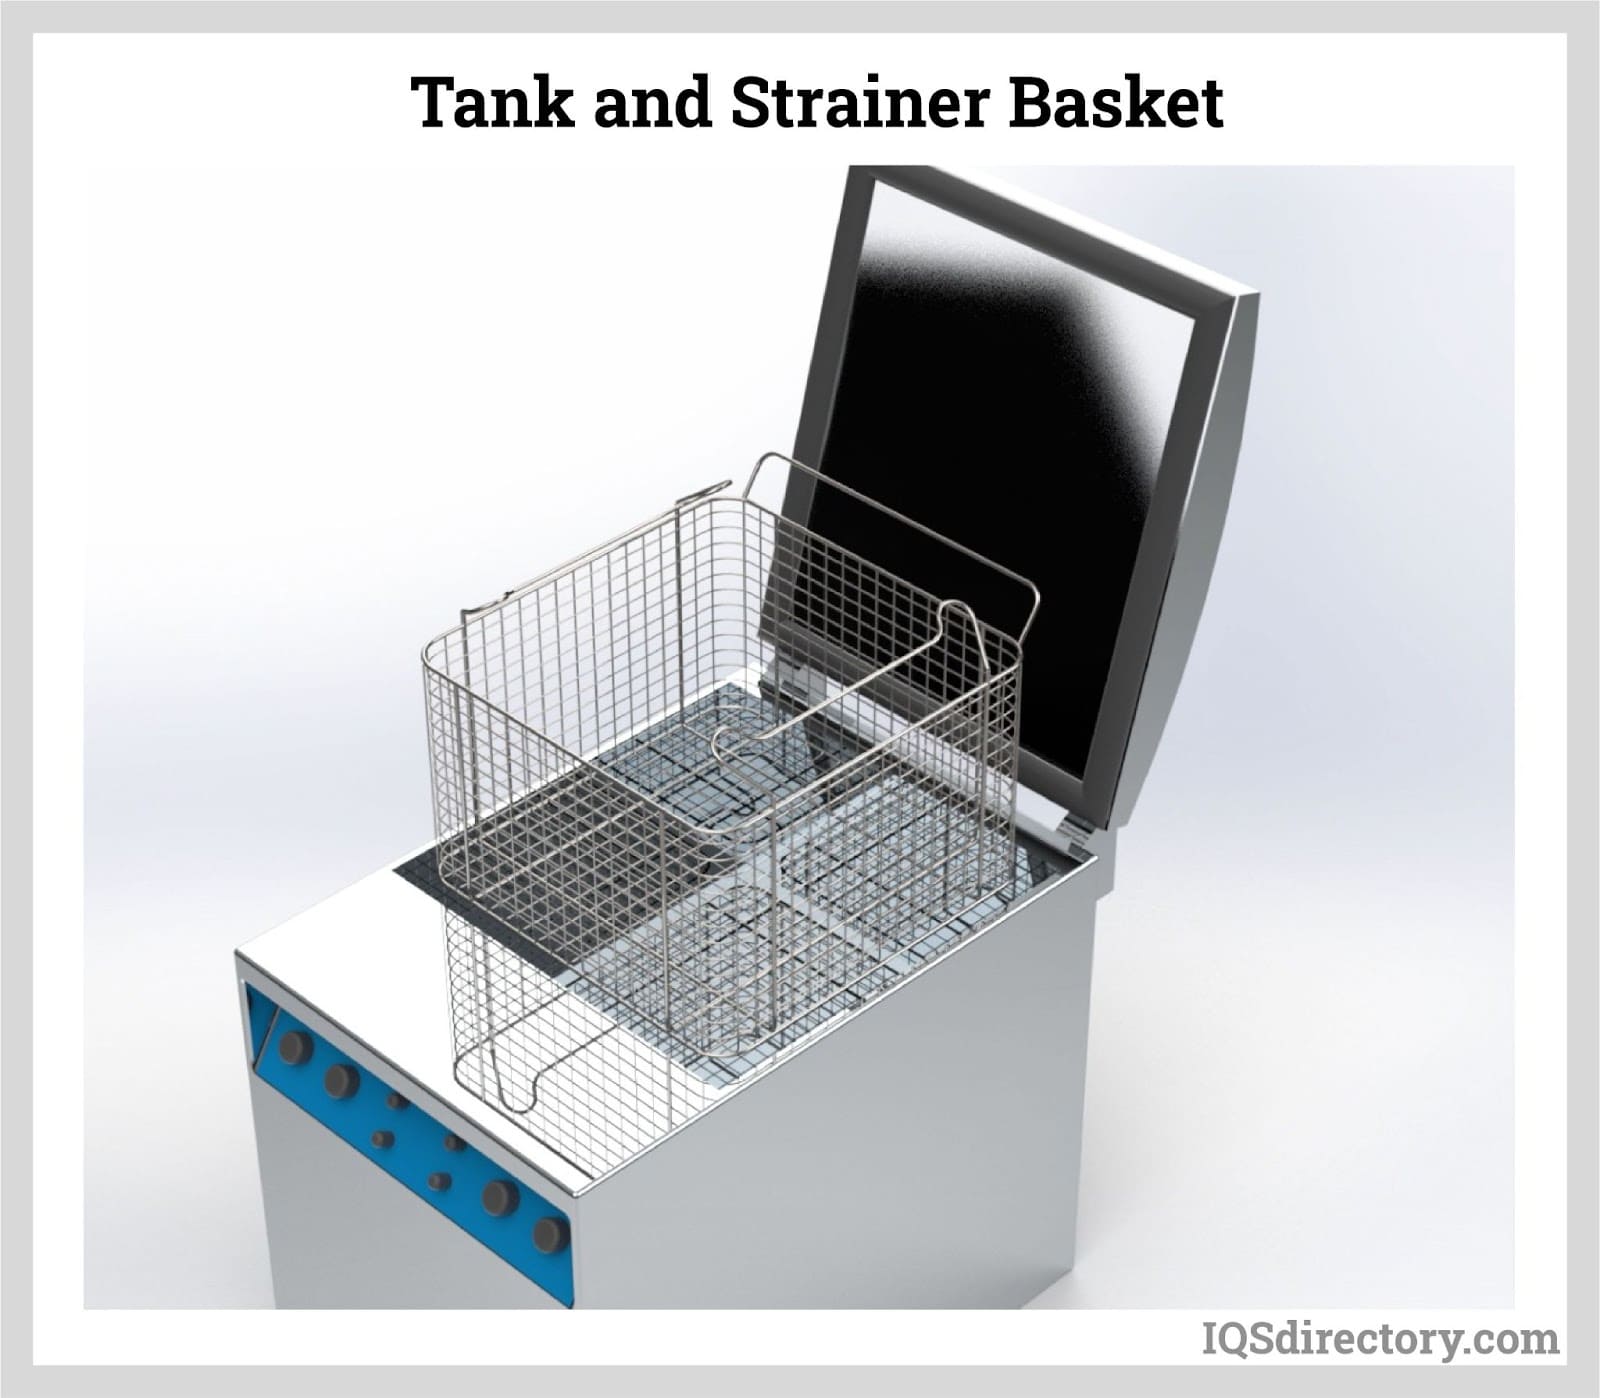 Tank and Strainer Basket